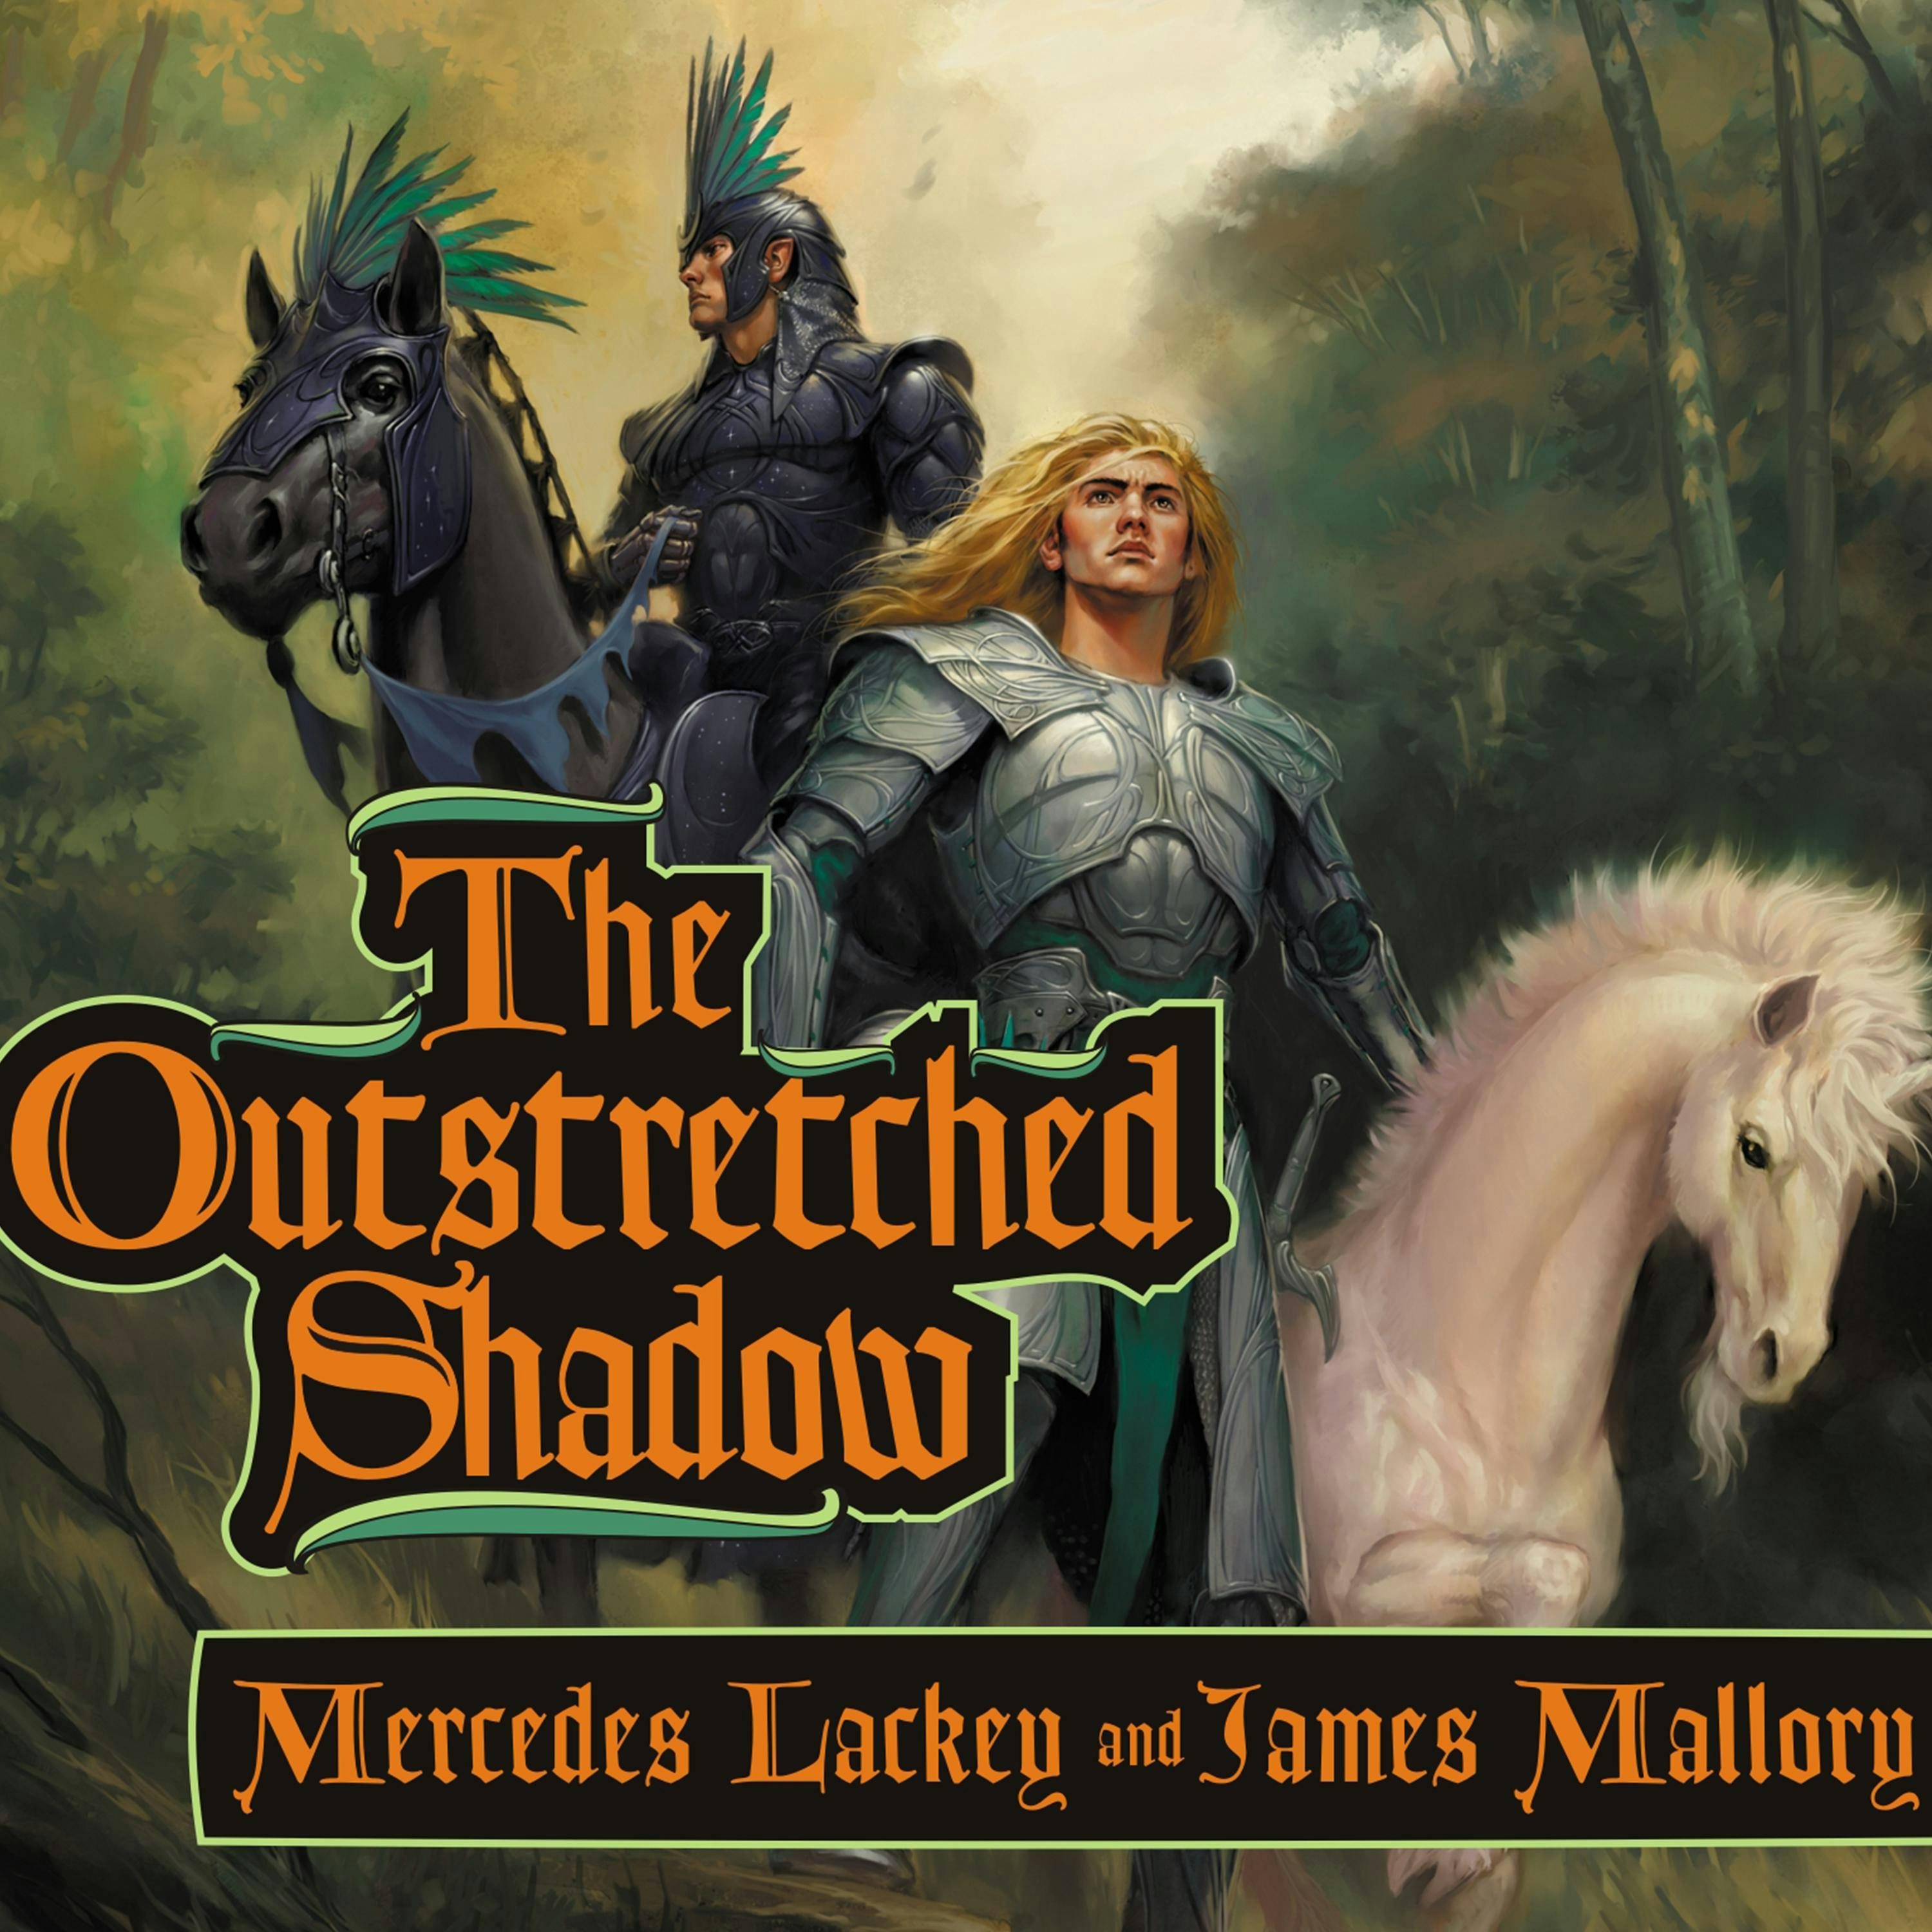 The Outstretched Shadow - undefined